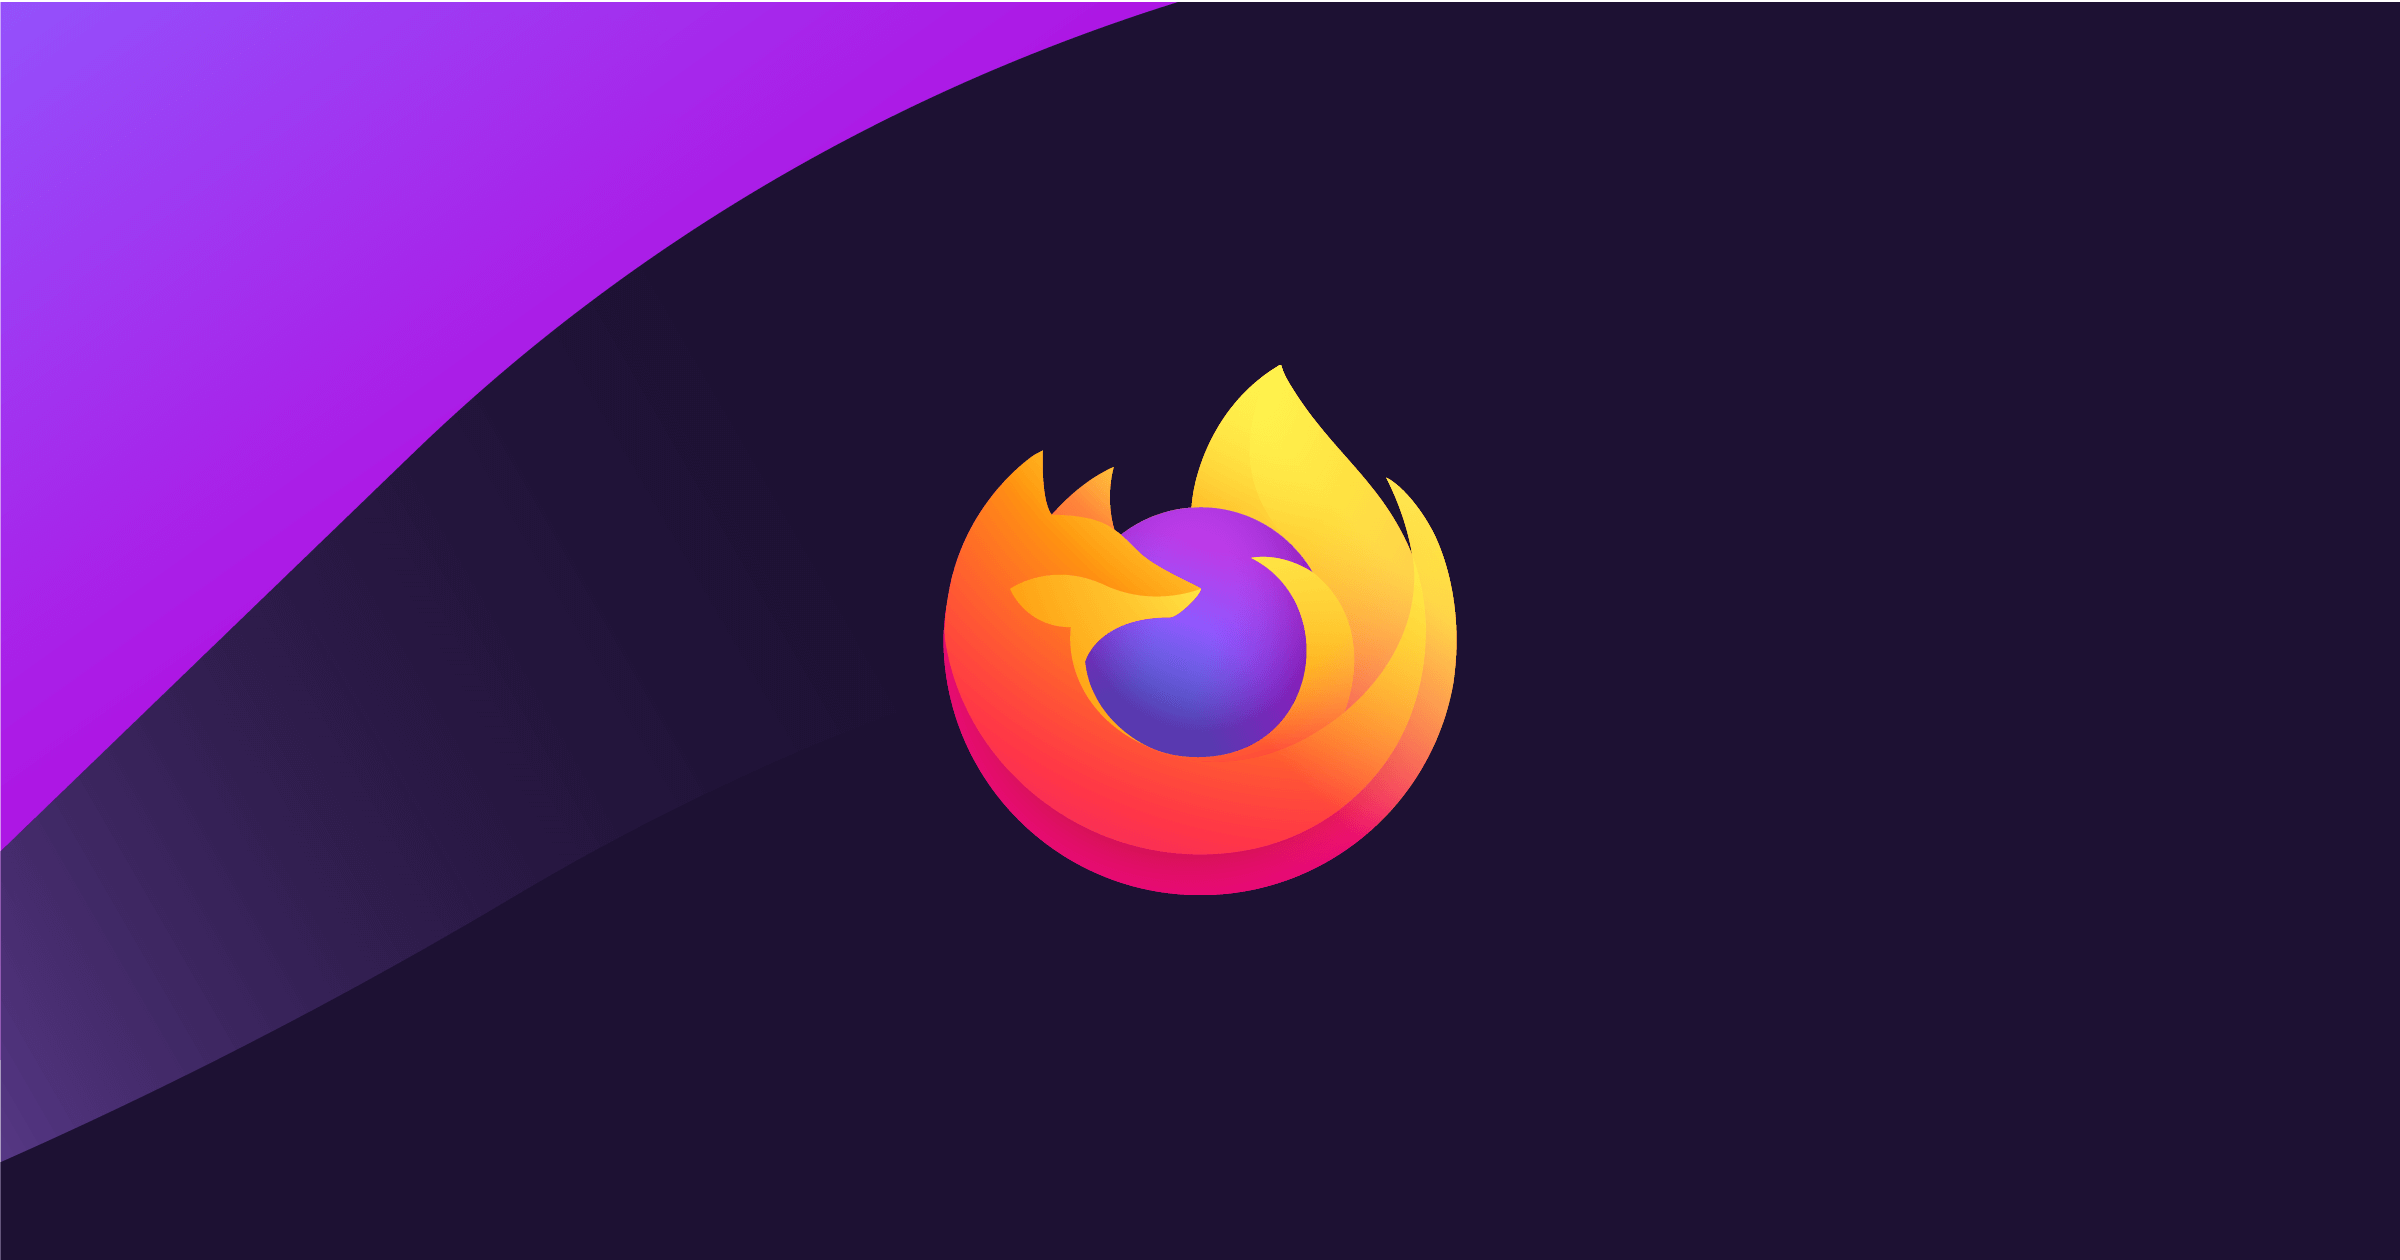 Download and test future releases of Firefox for desktop, Android and iOS.